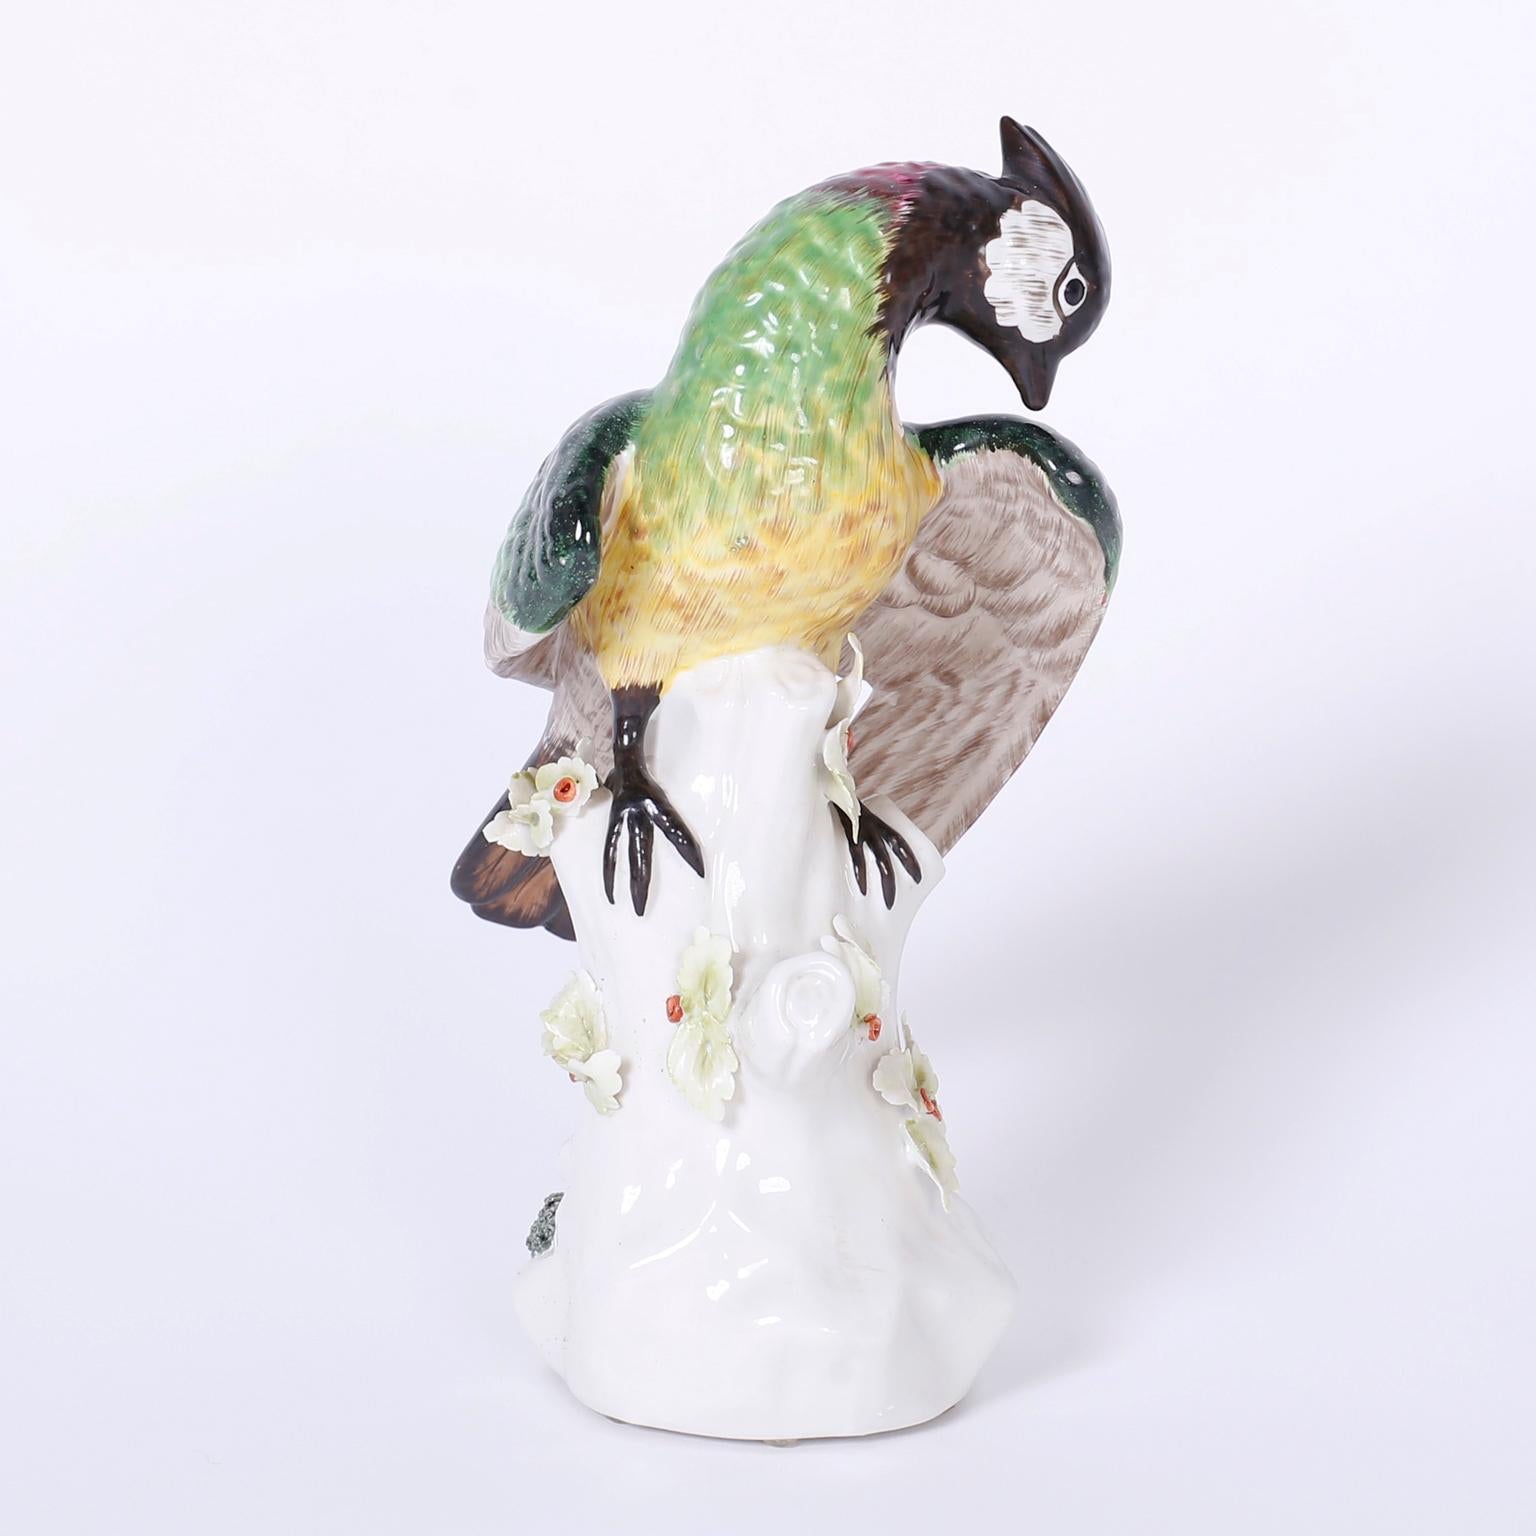 Fine pair of porcelain parrots with matching quizzical expressions and
colorful plumage, perched on blanc de chine tree trunks. Signed Italy on the bottom.